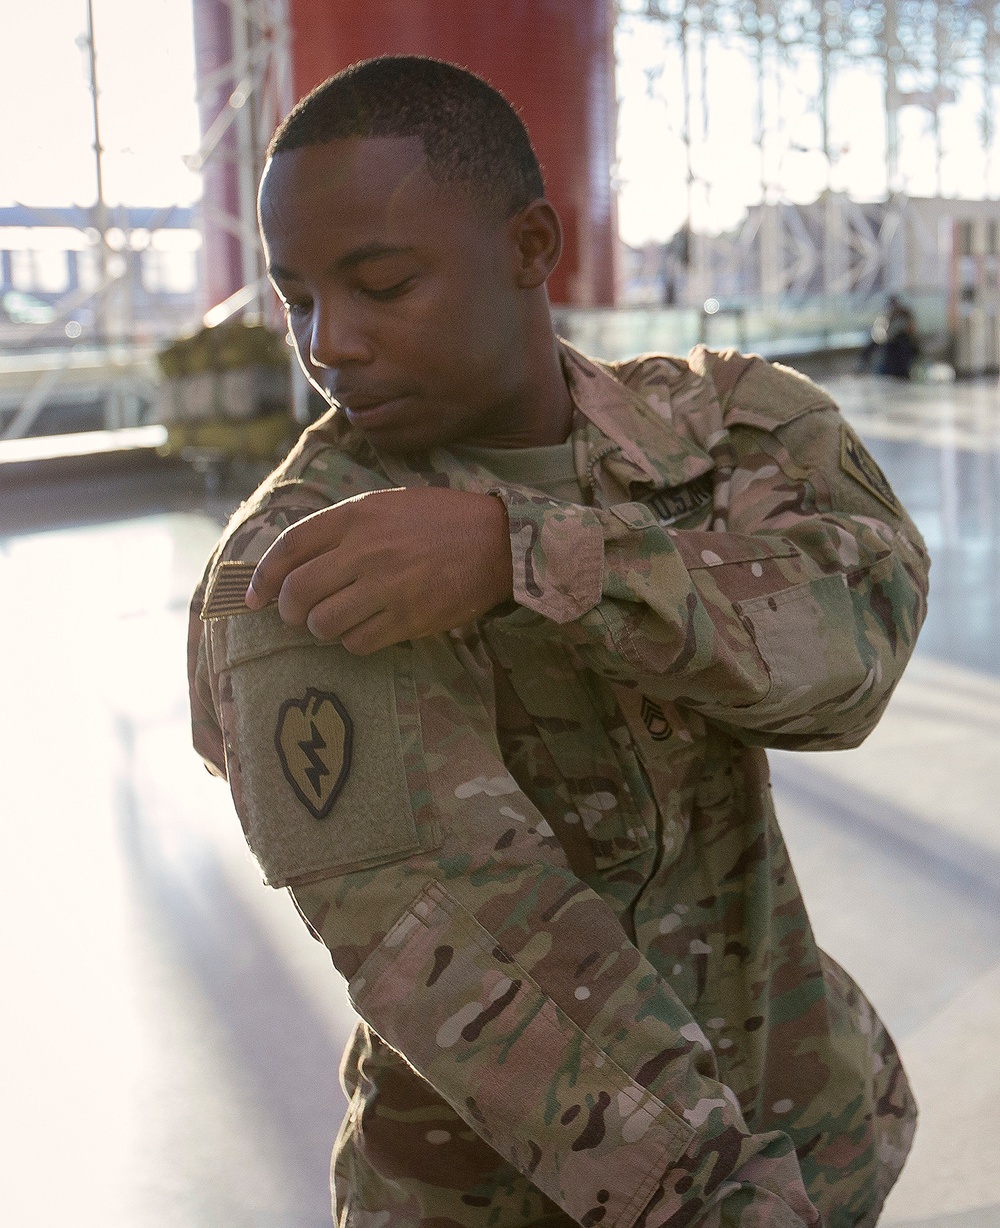 Forward Engineering Support Team - Advance soldier prepares for deployment